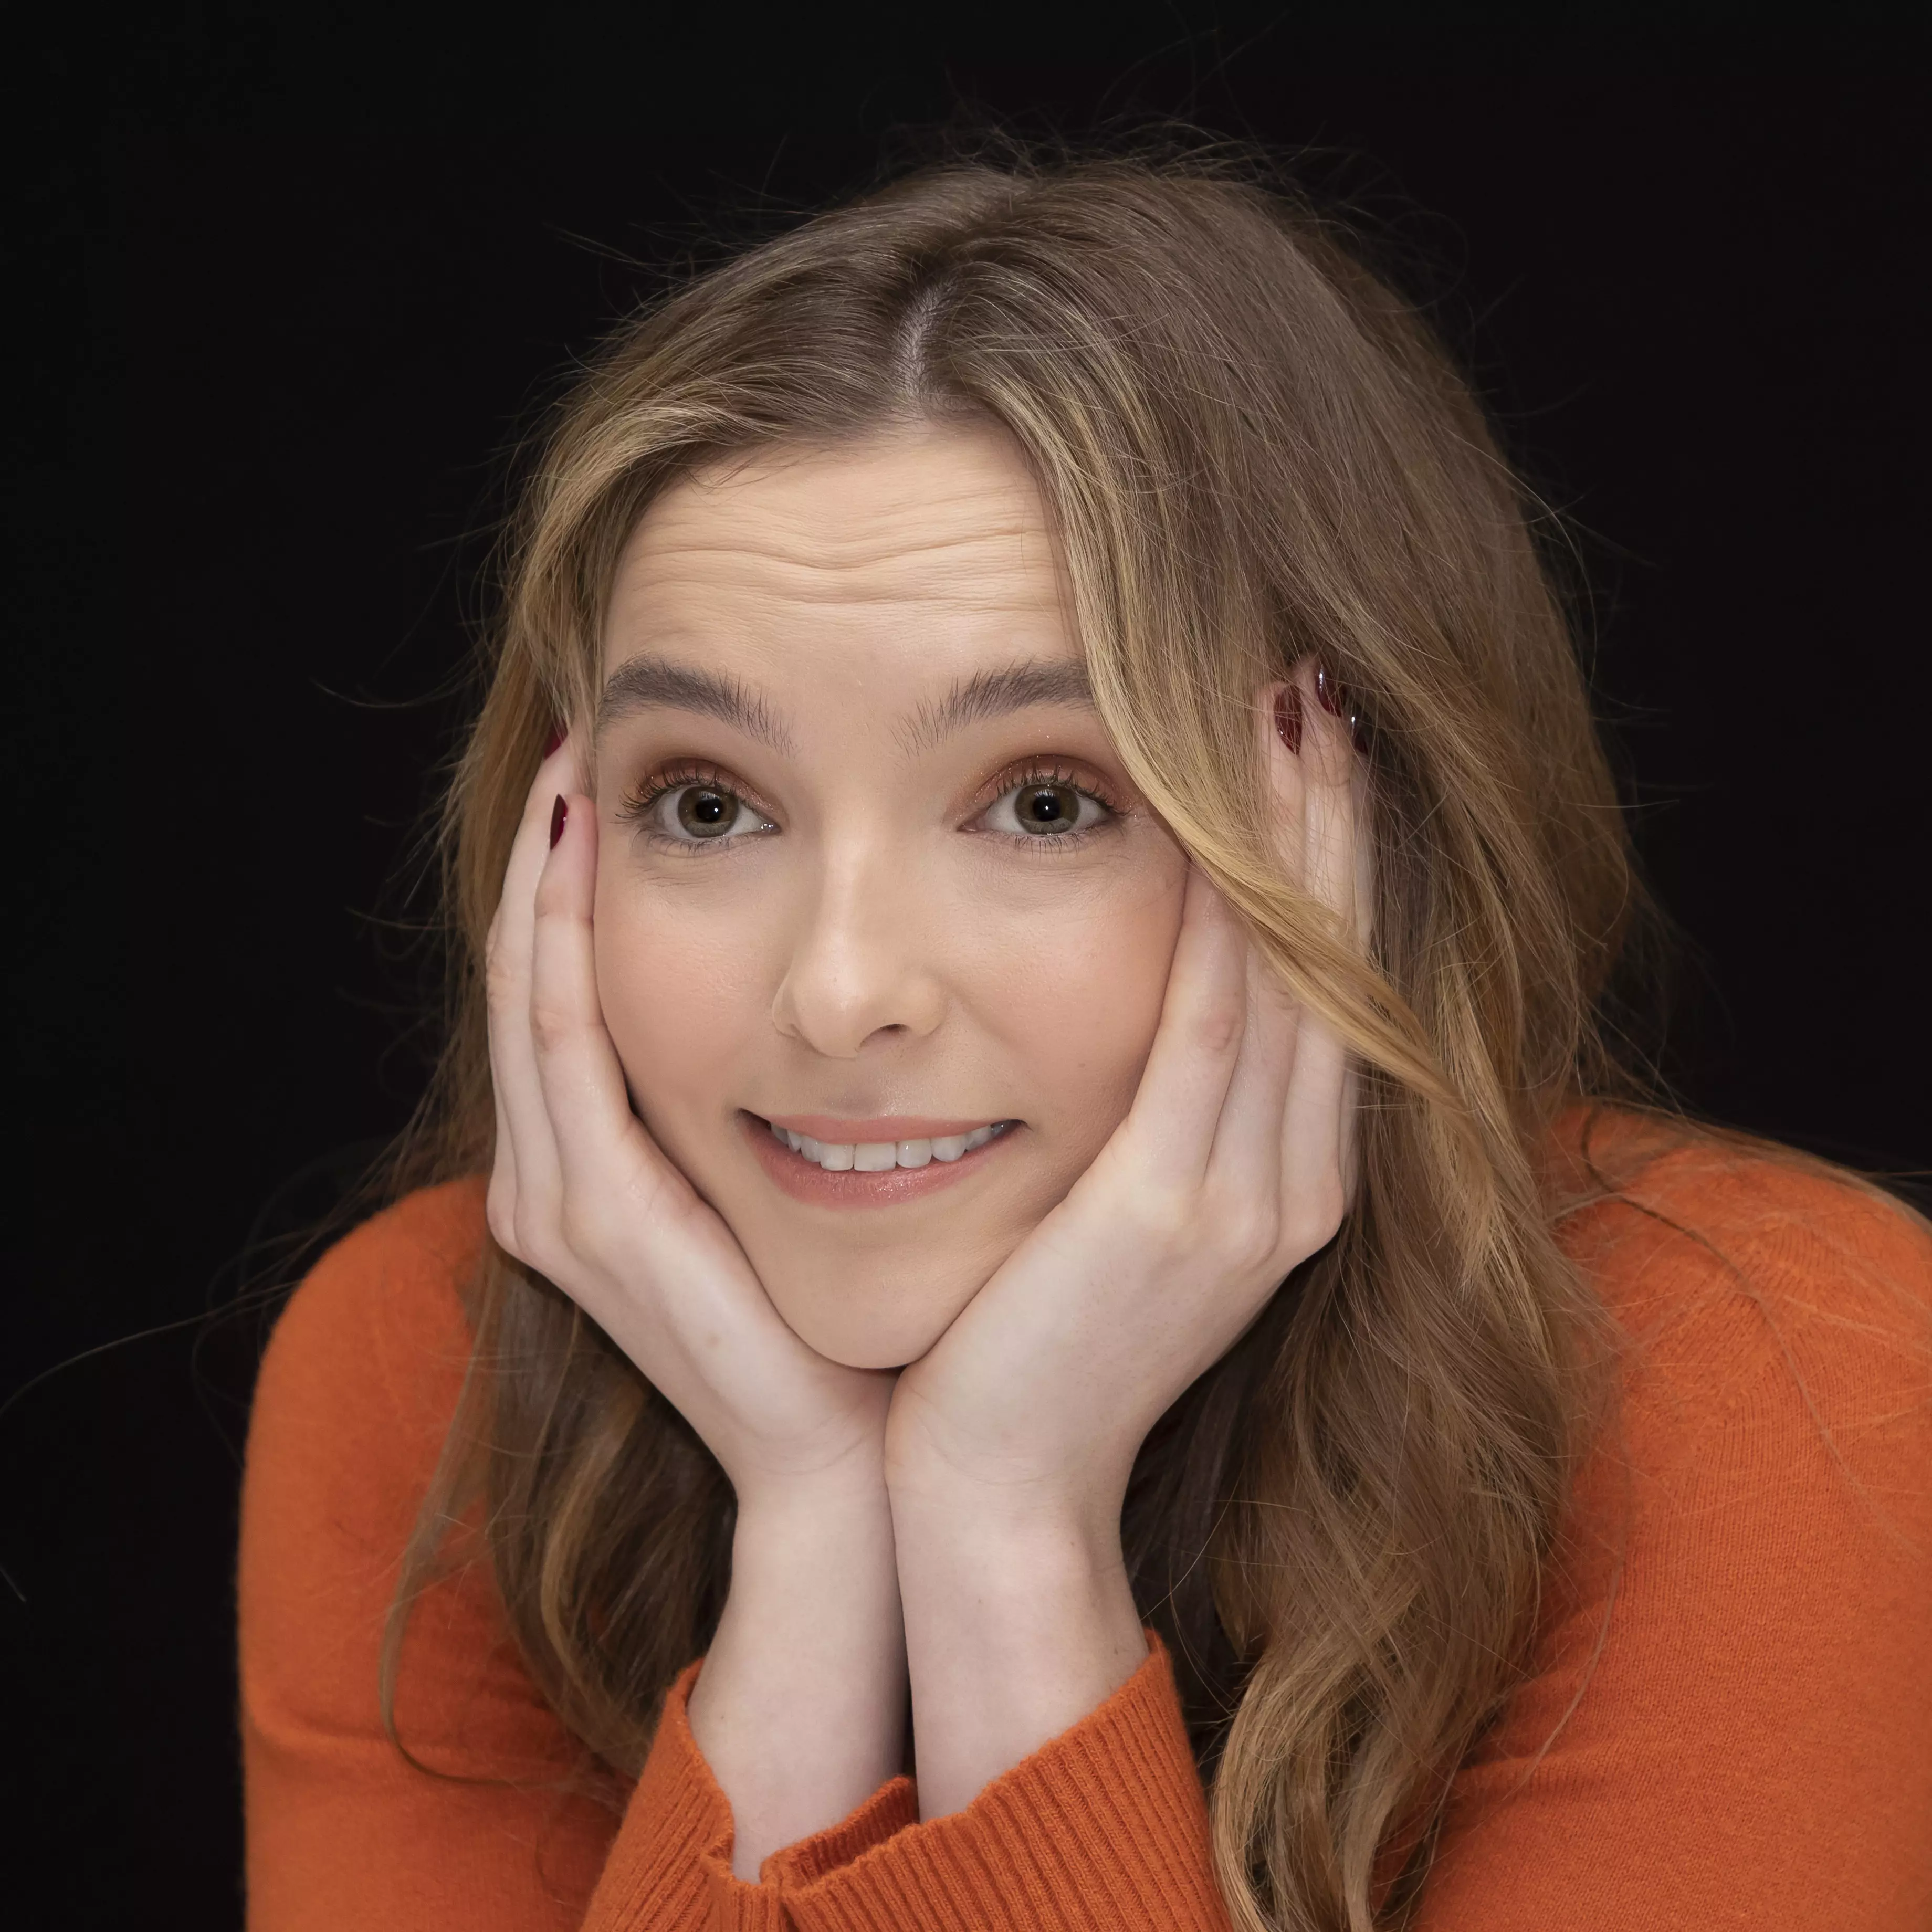 Who Is Killing Eve Star Jodie Comer.